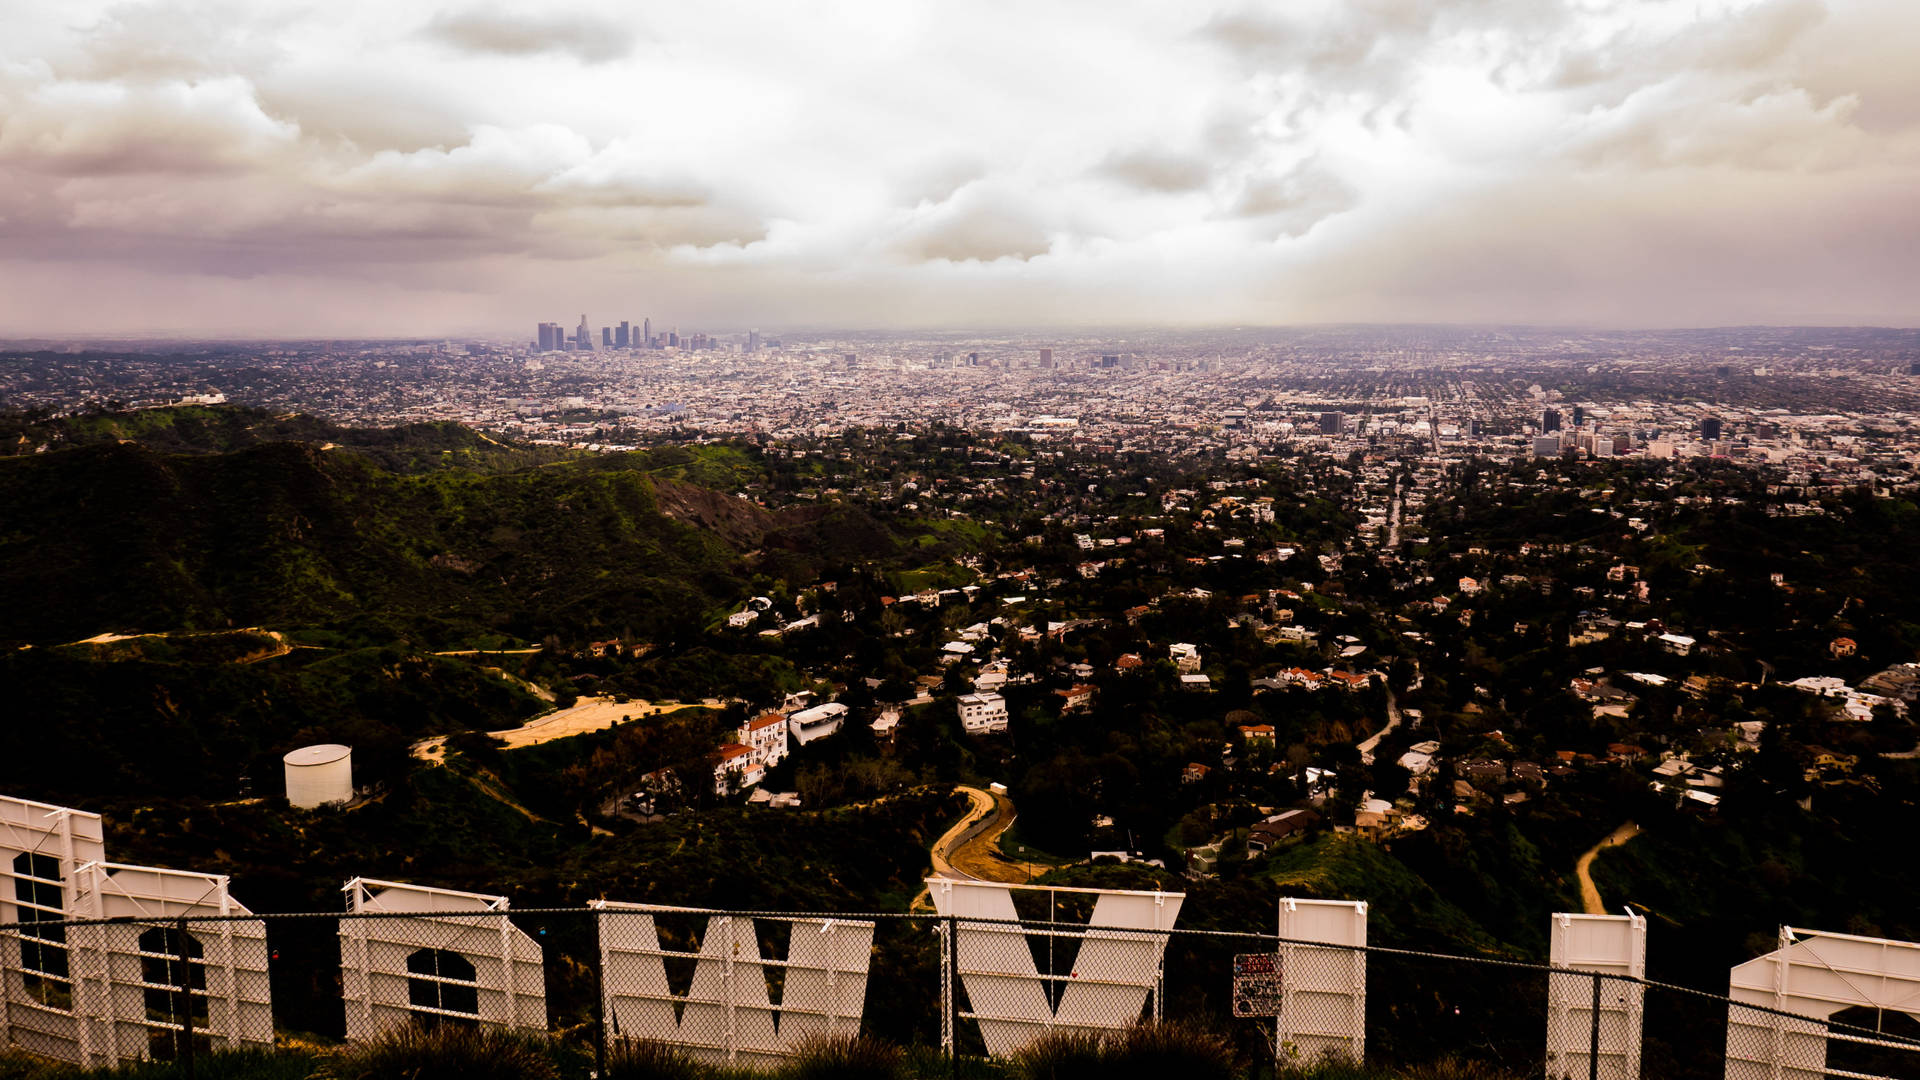 Behind The Hollywood Sign